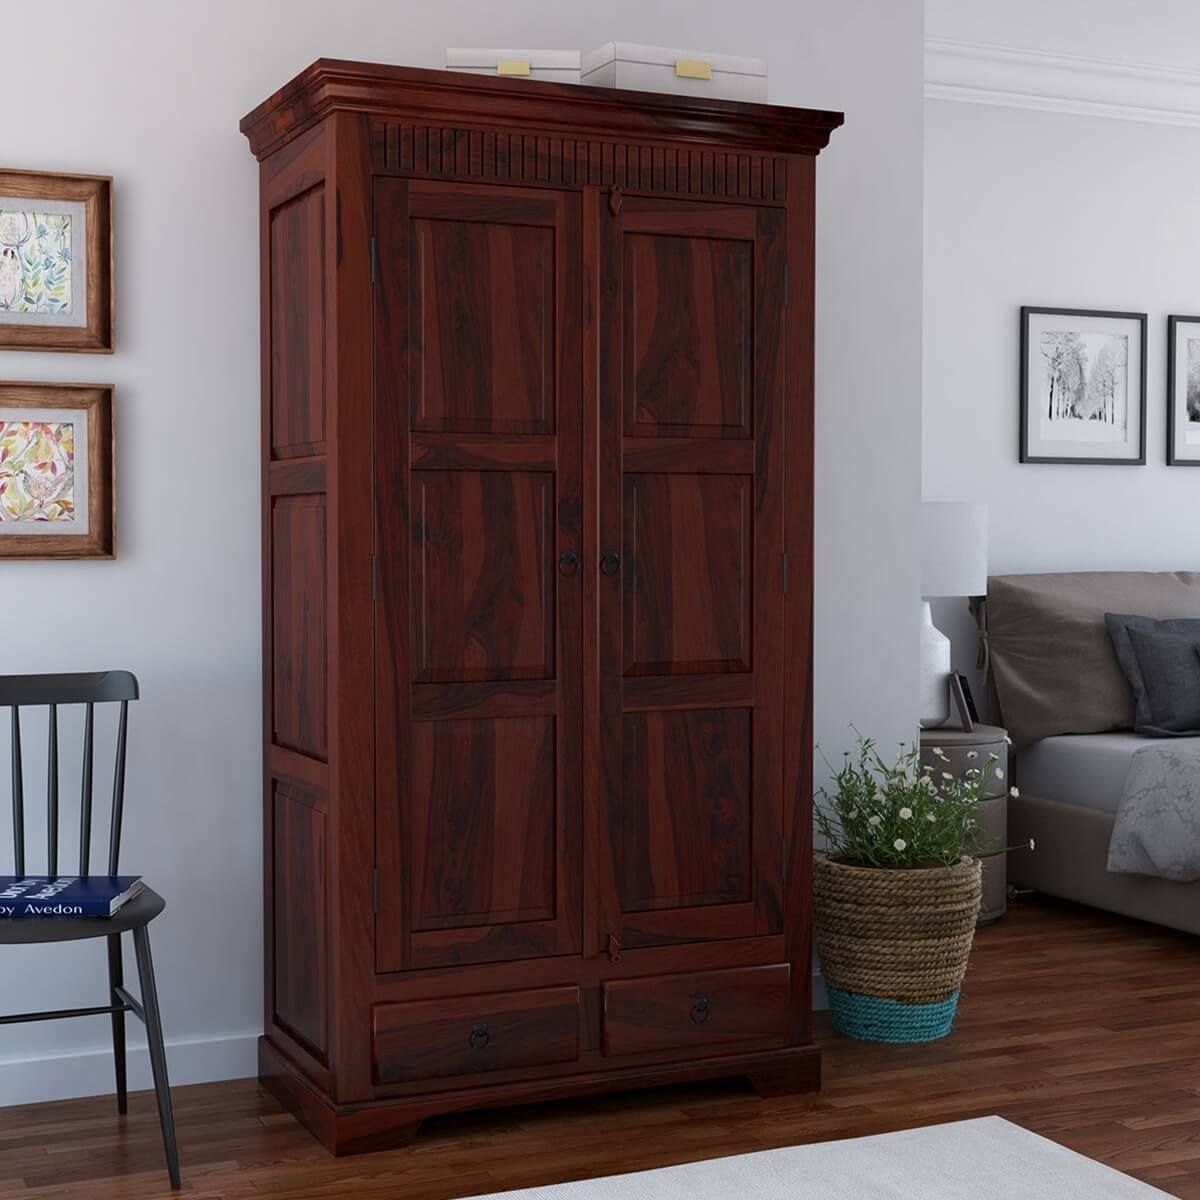 Marengo Rustic Solid Wood Large Wardrobe Armoire W Shelves And Drawers Intended For Large Wooden Wardrobes (Photo 14 of 15)